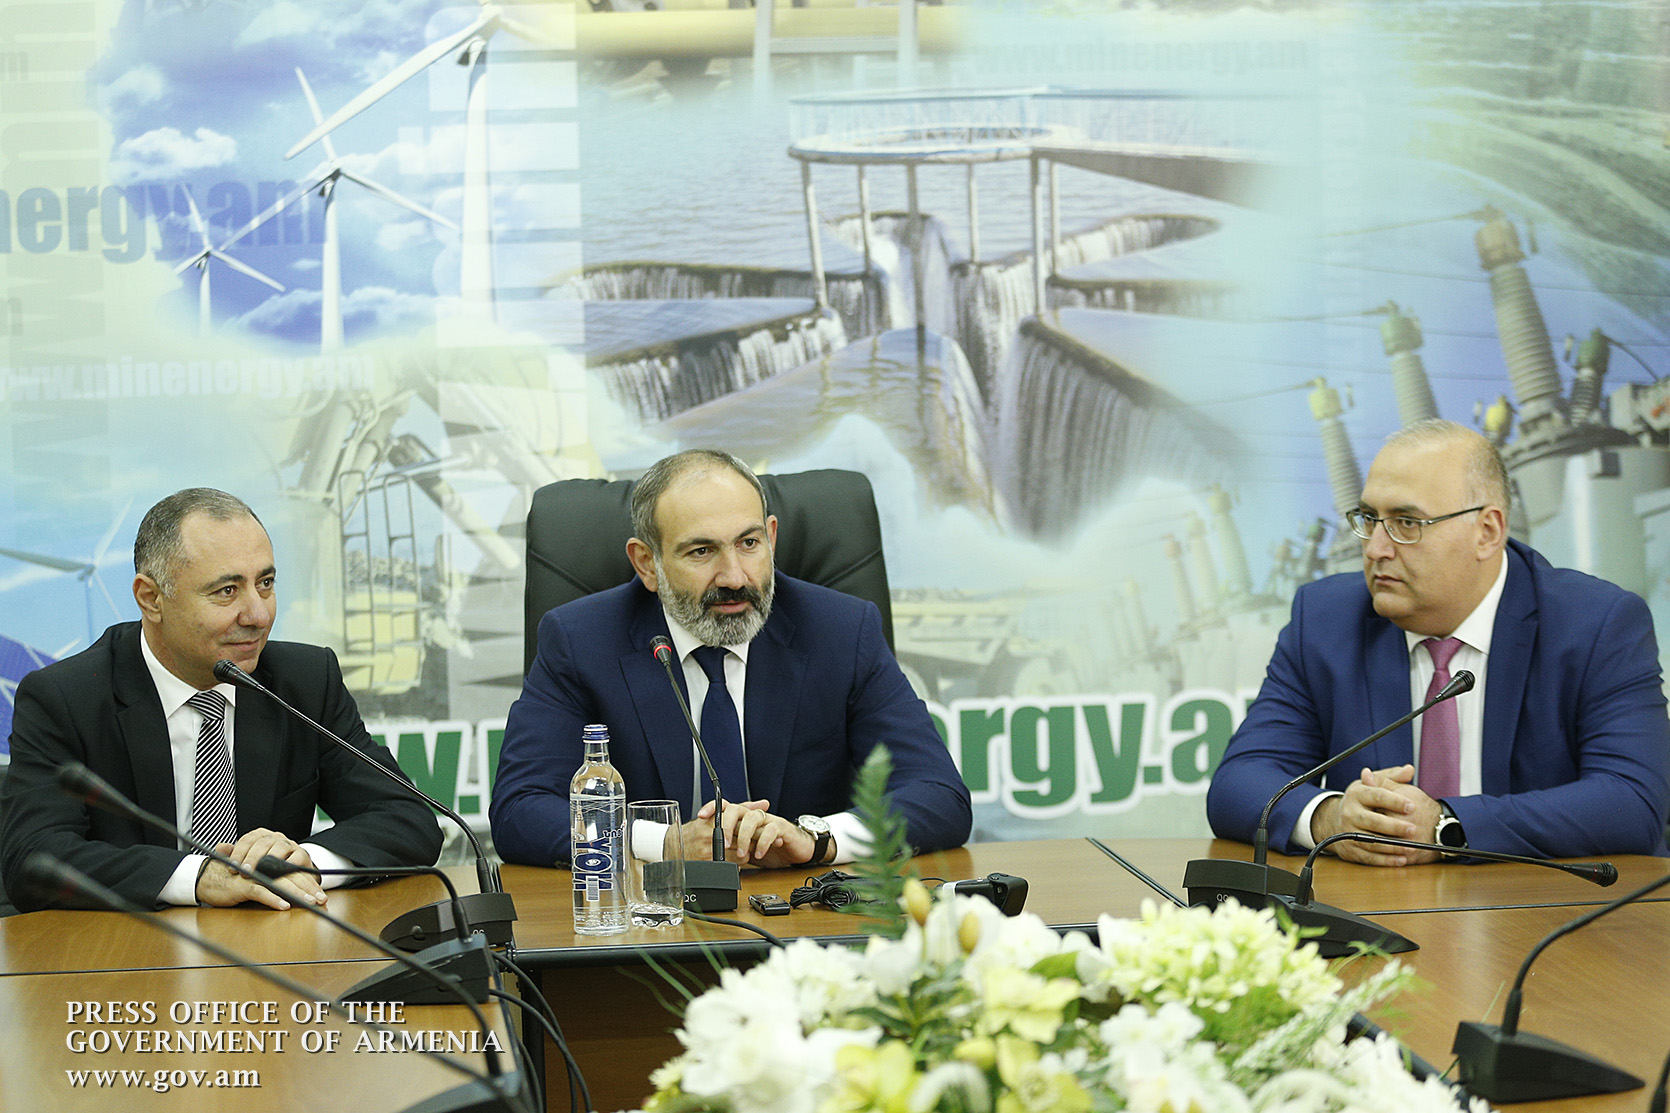 Nikol Pashinyan introduces newly appointed Minister of Energy Infrastructures and Natural Resources